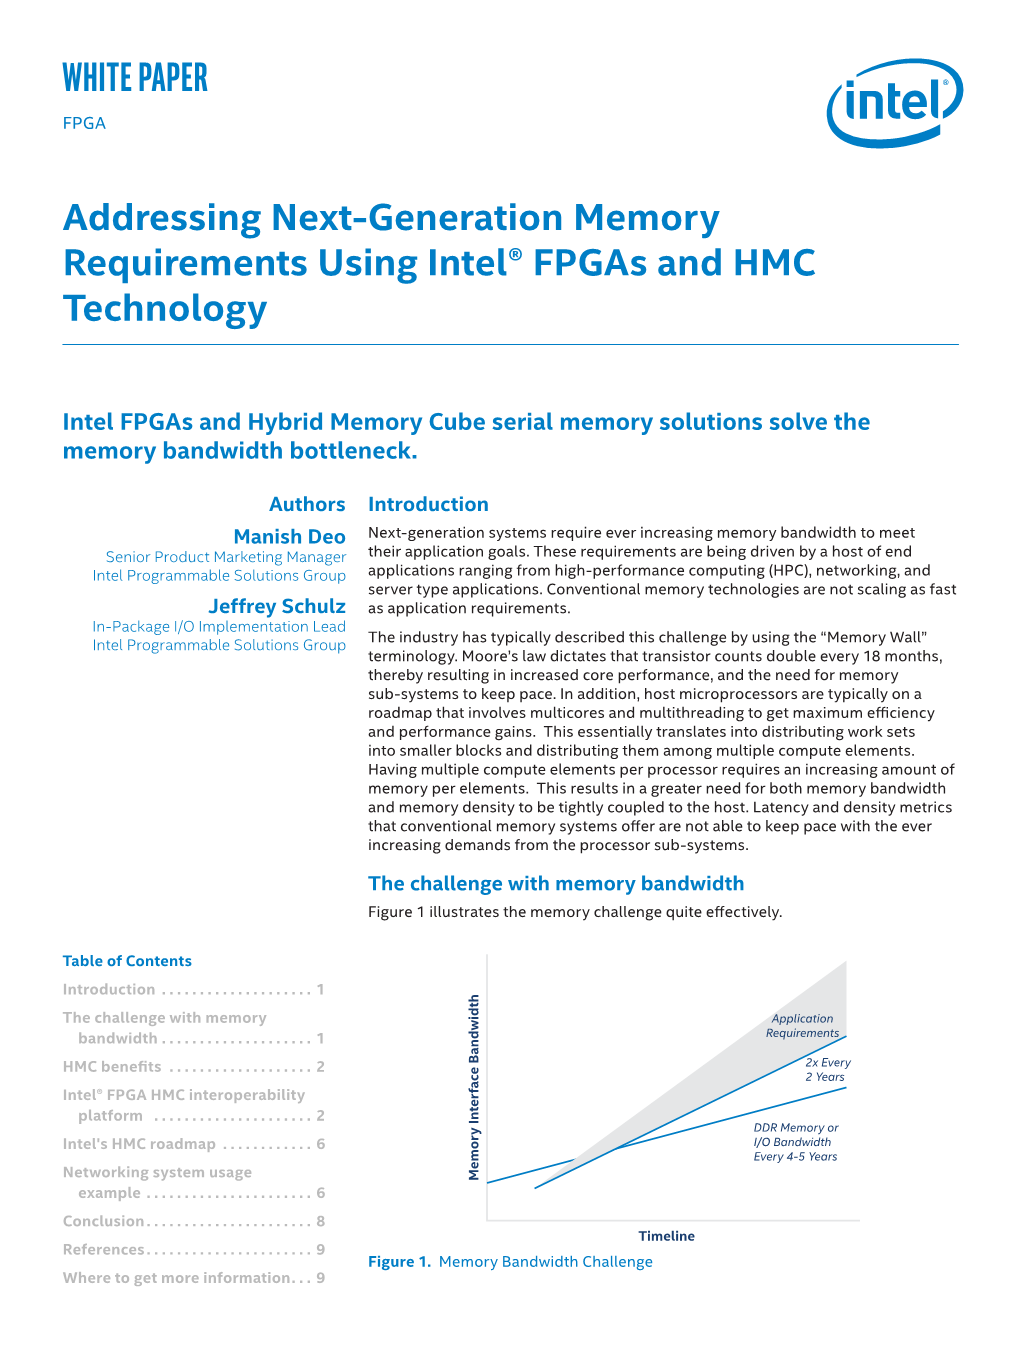 Addressing Next-Generation Memory Requirements Using Intel® Fpgas and HMC Technology